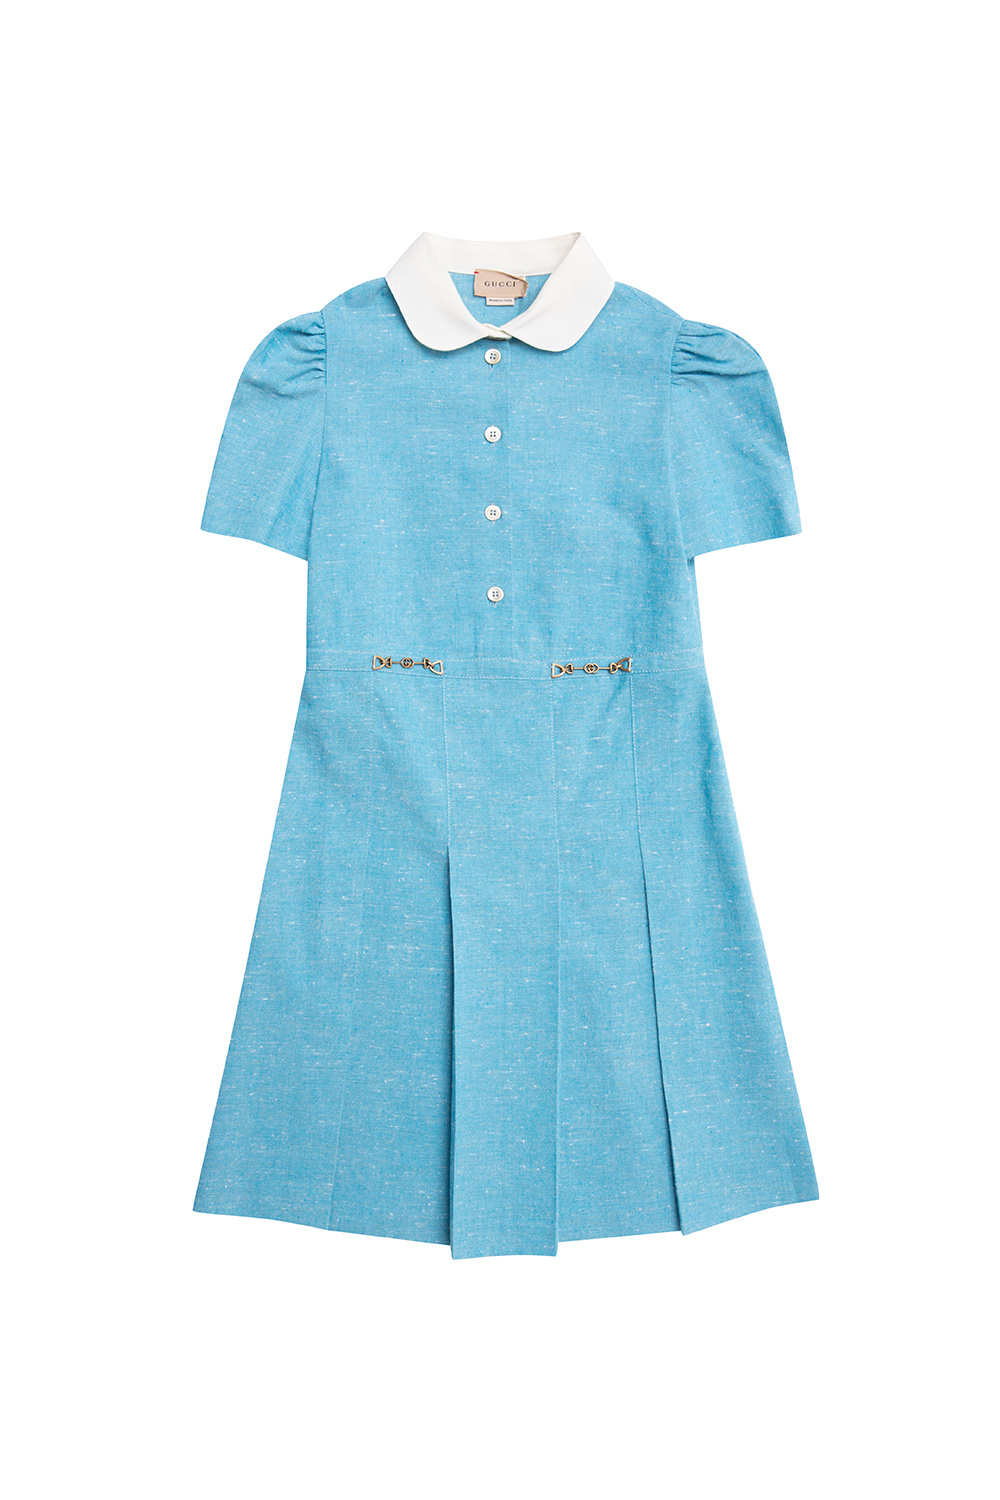 gucci for Kids Dress with collar